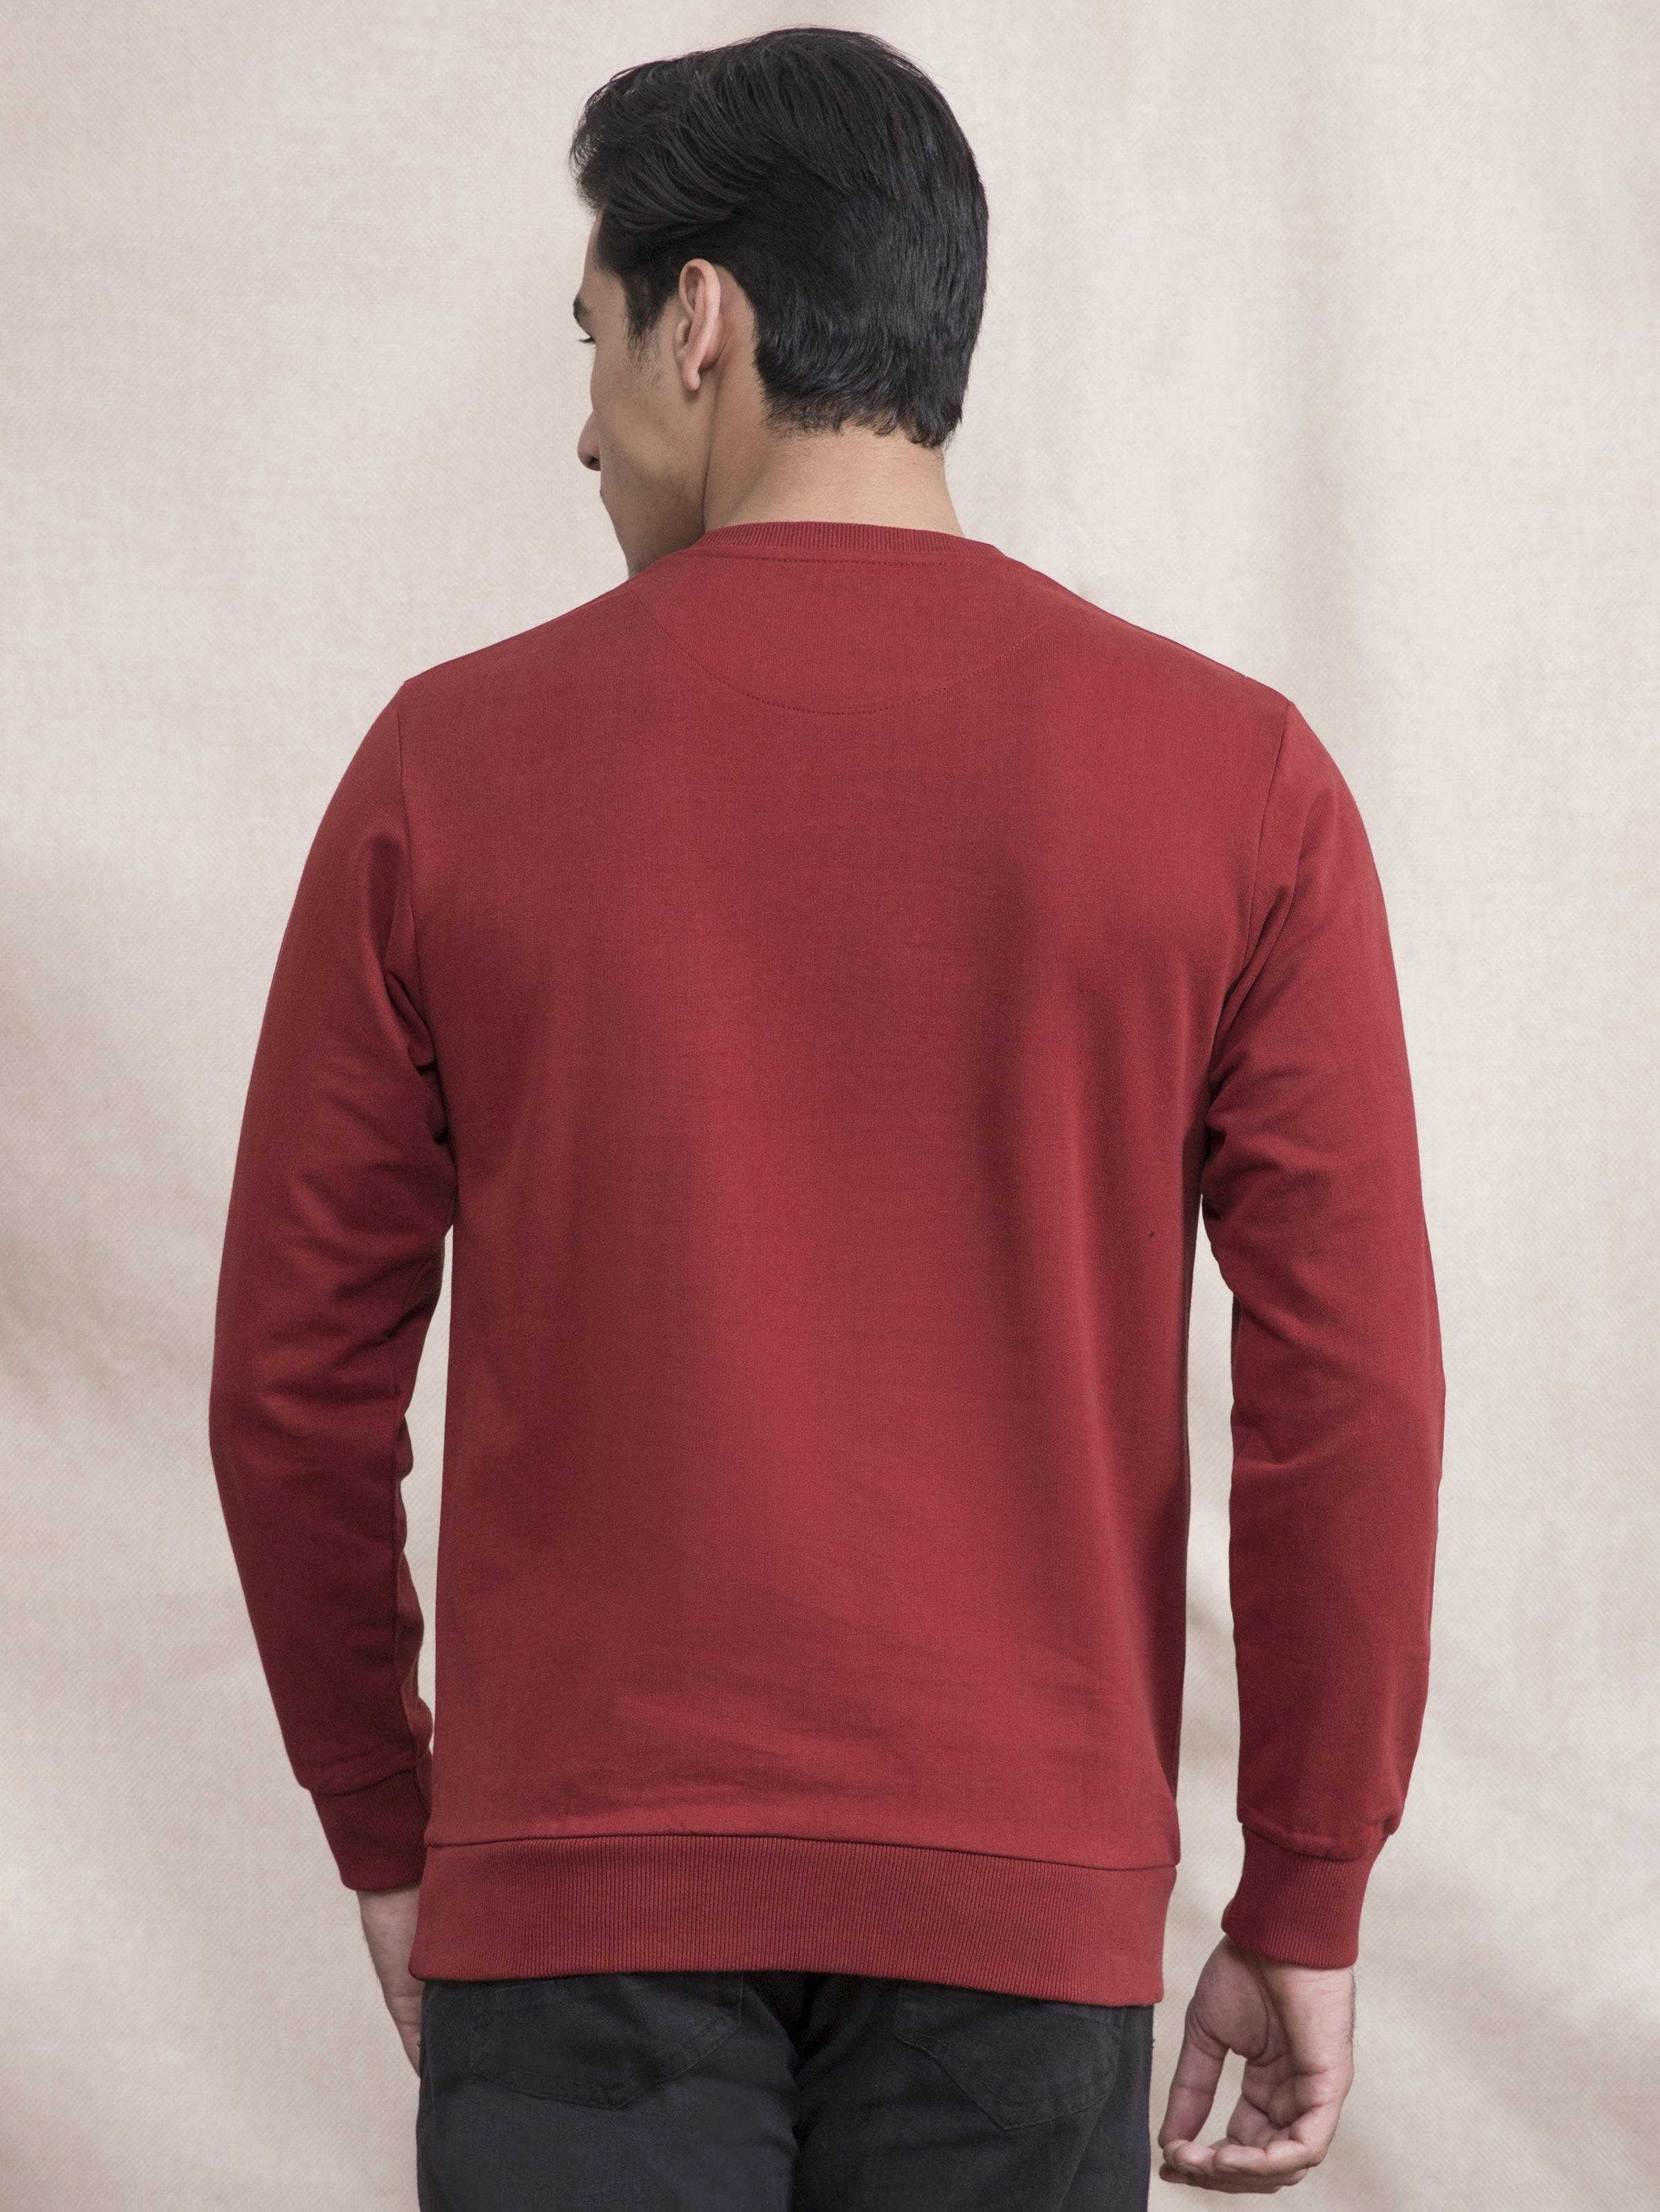 SWEAT SHIRT FULL SLEEVE RUST at Charcoal Clothing